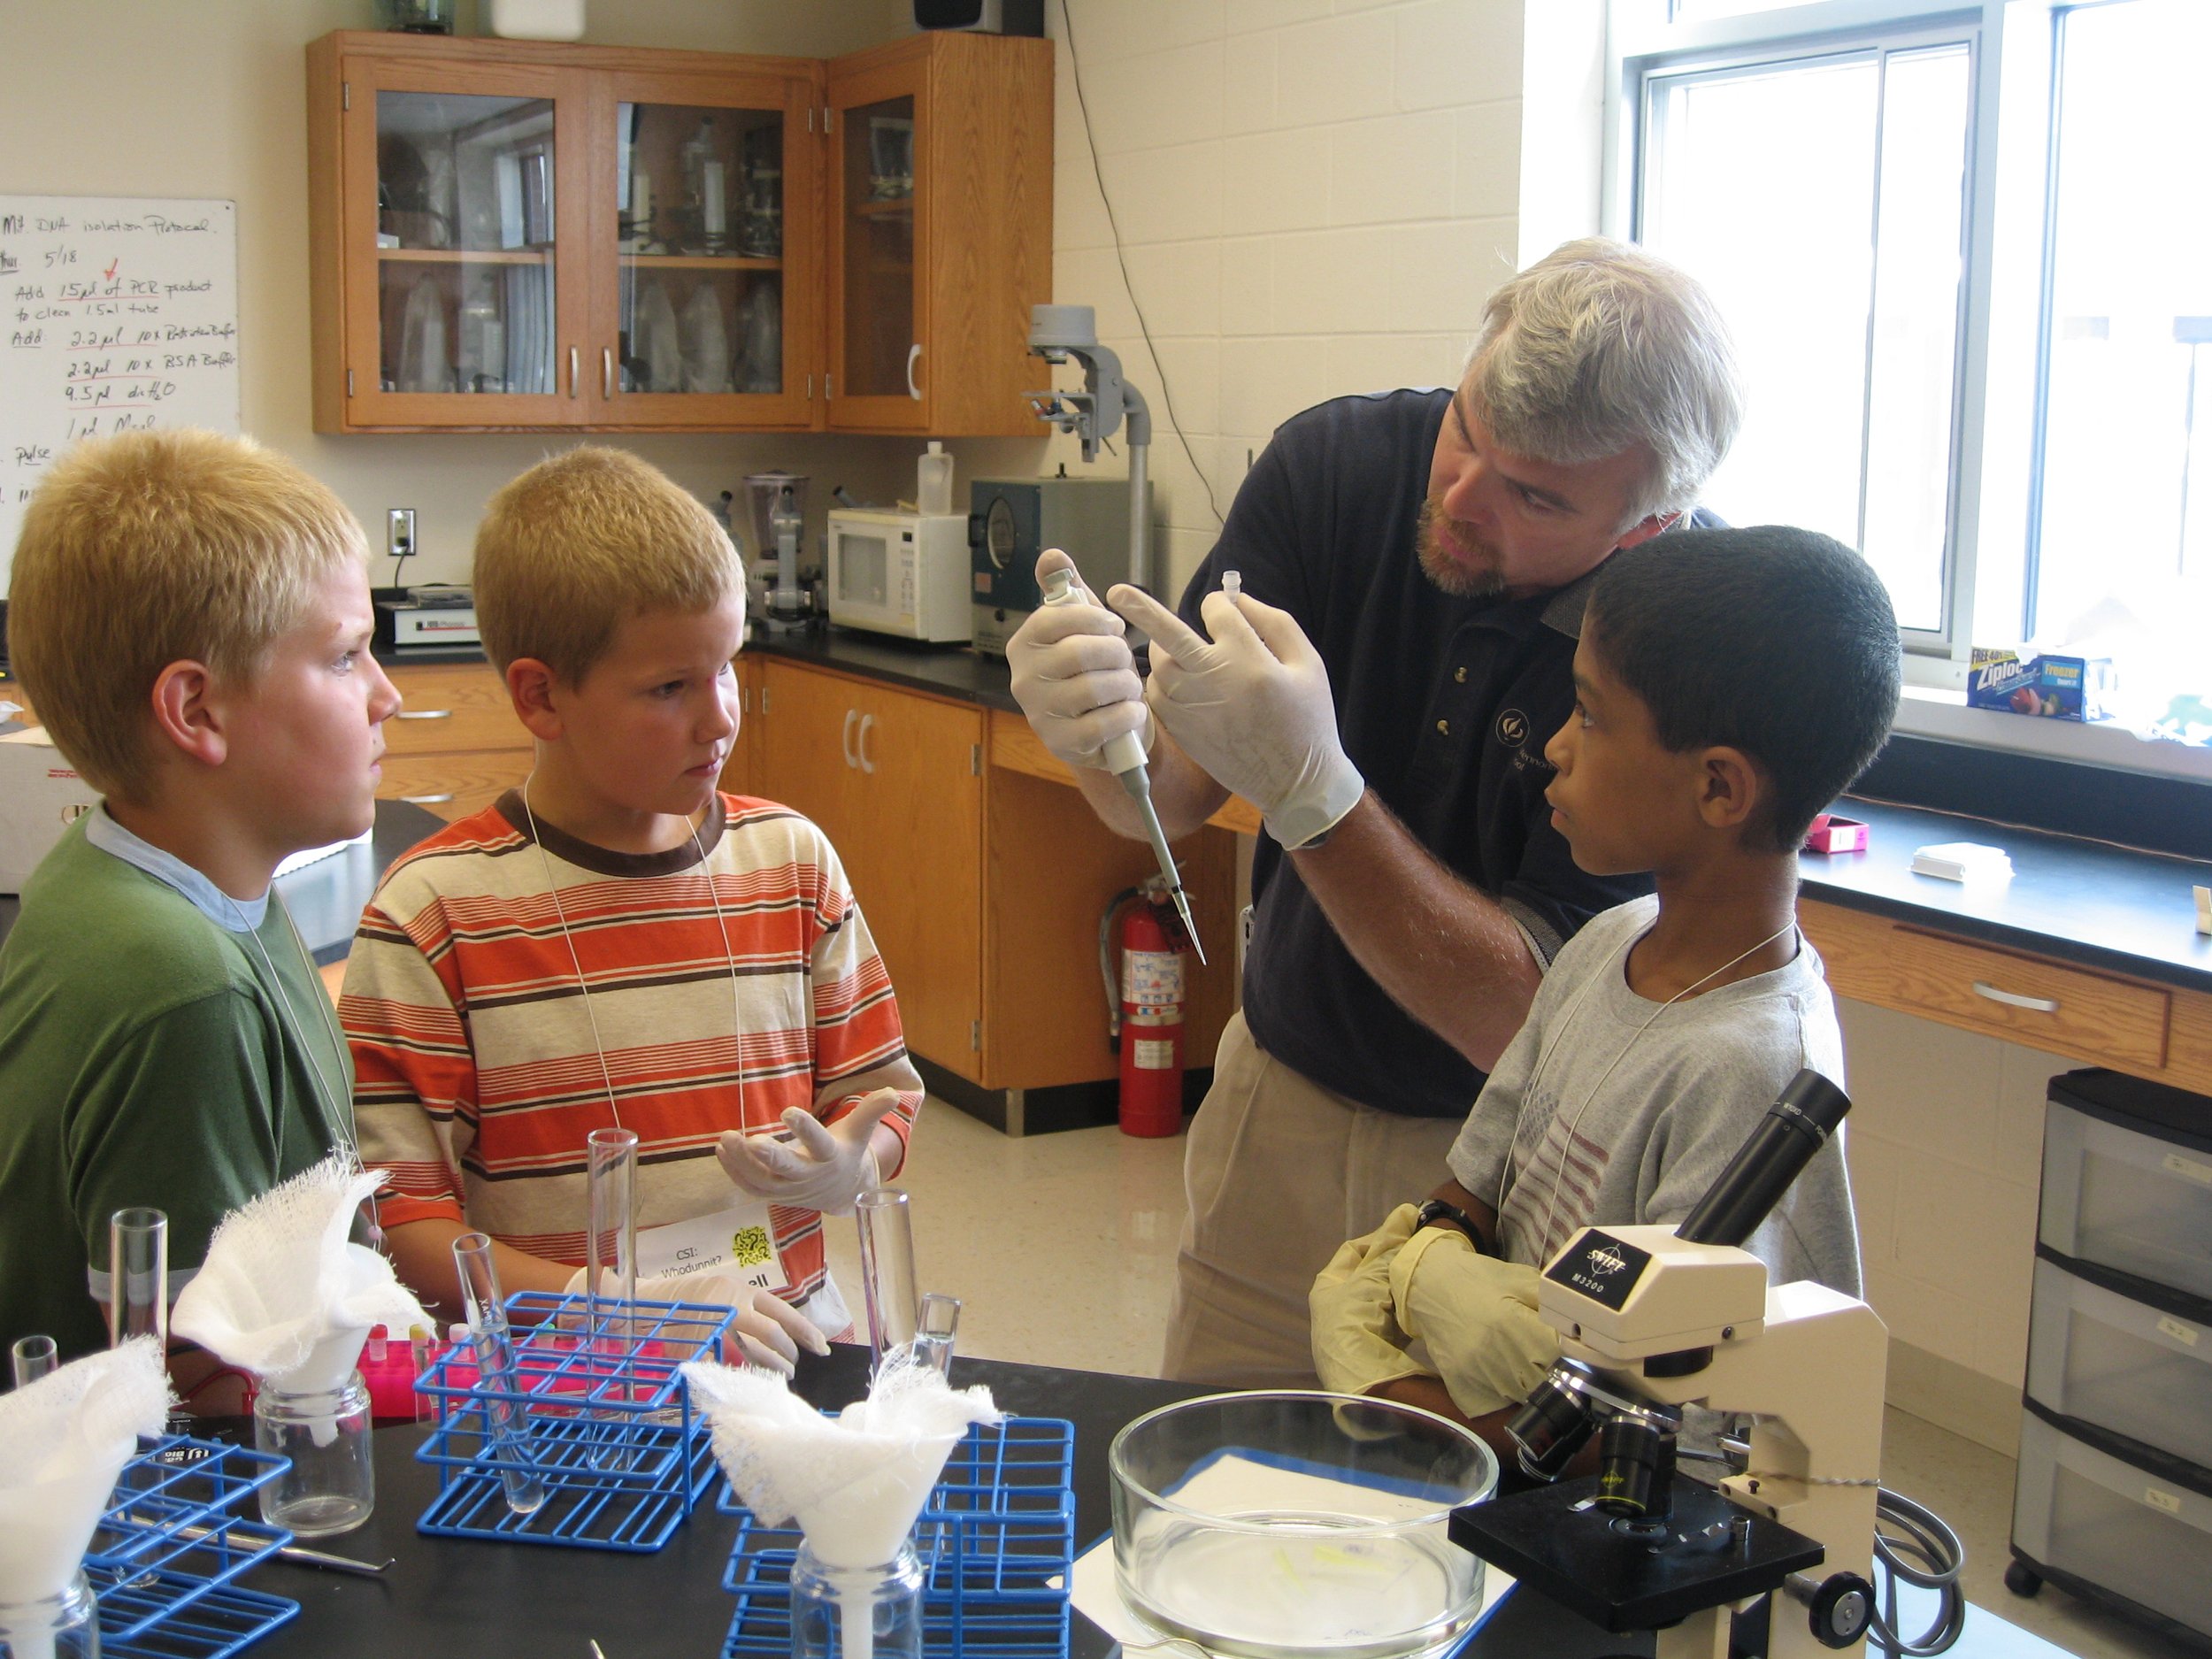  Local science educator Myron Blosser leads a CSI camp during the summer.  